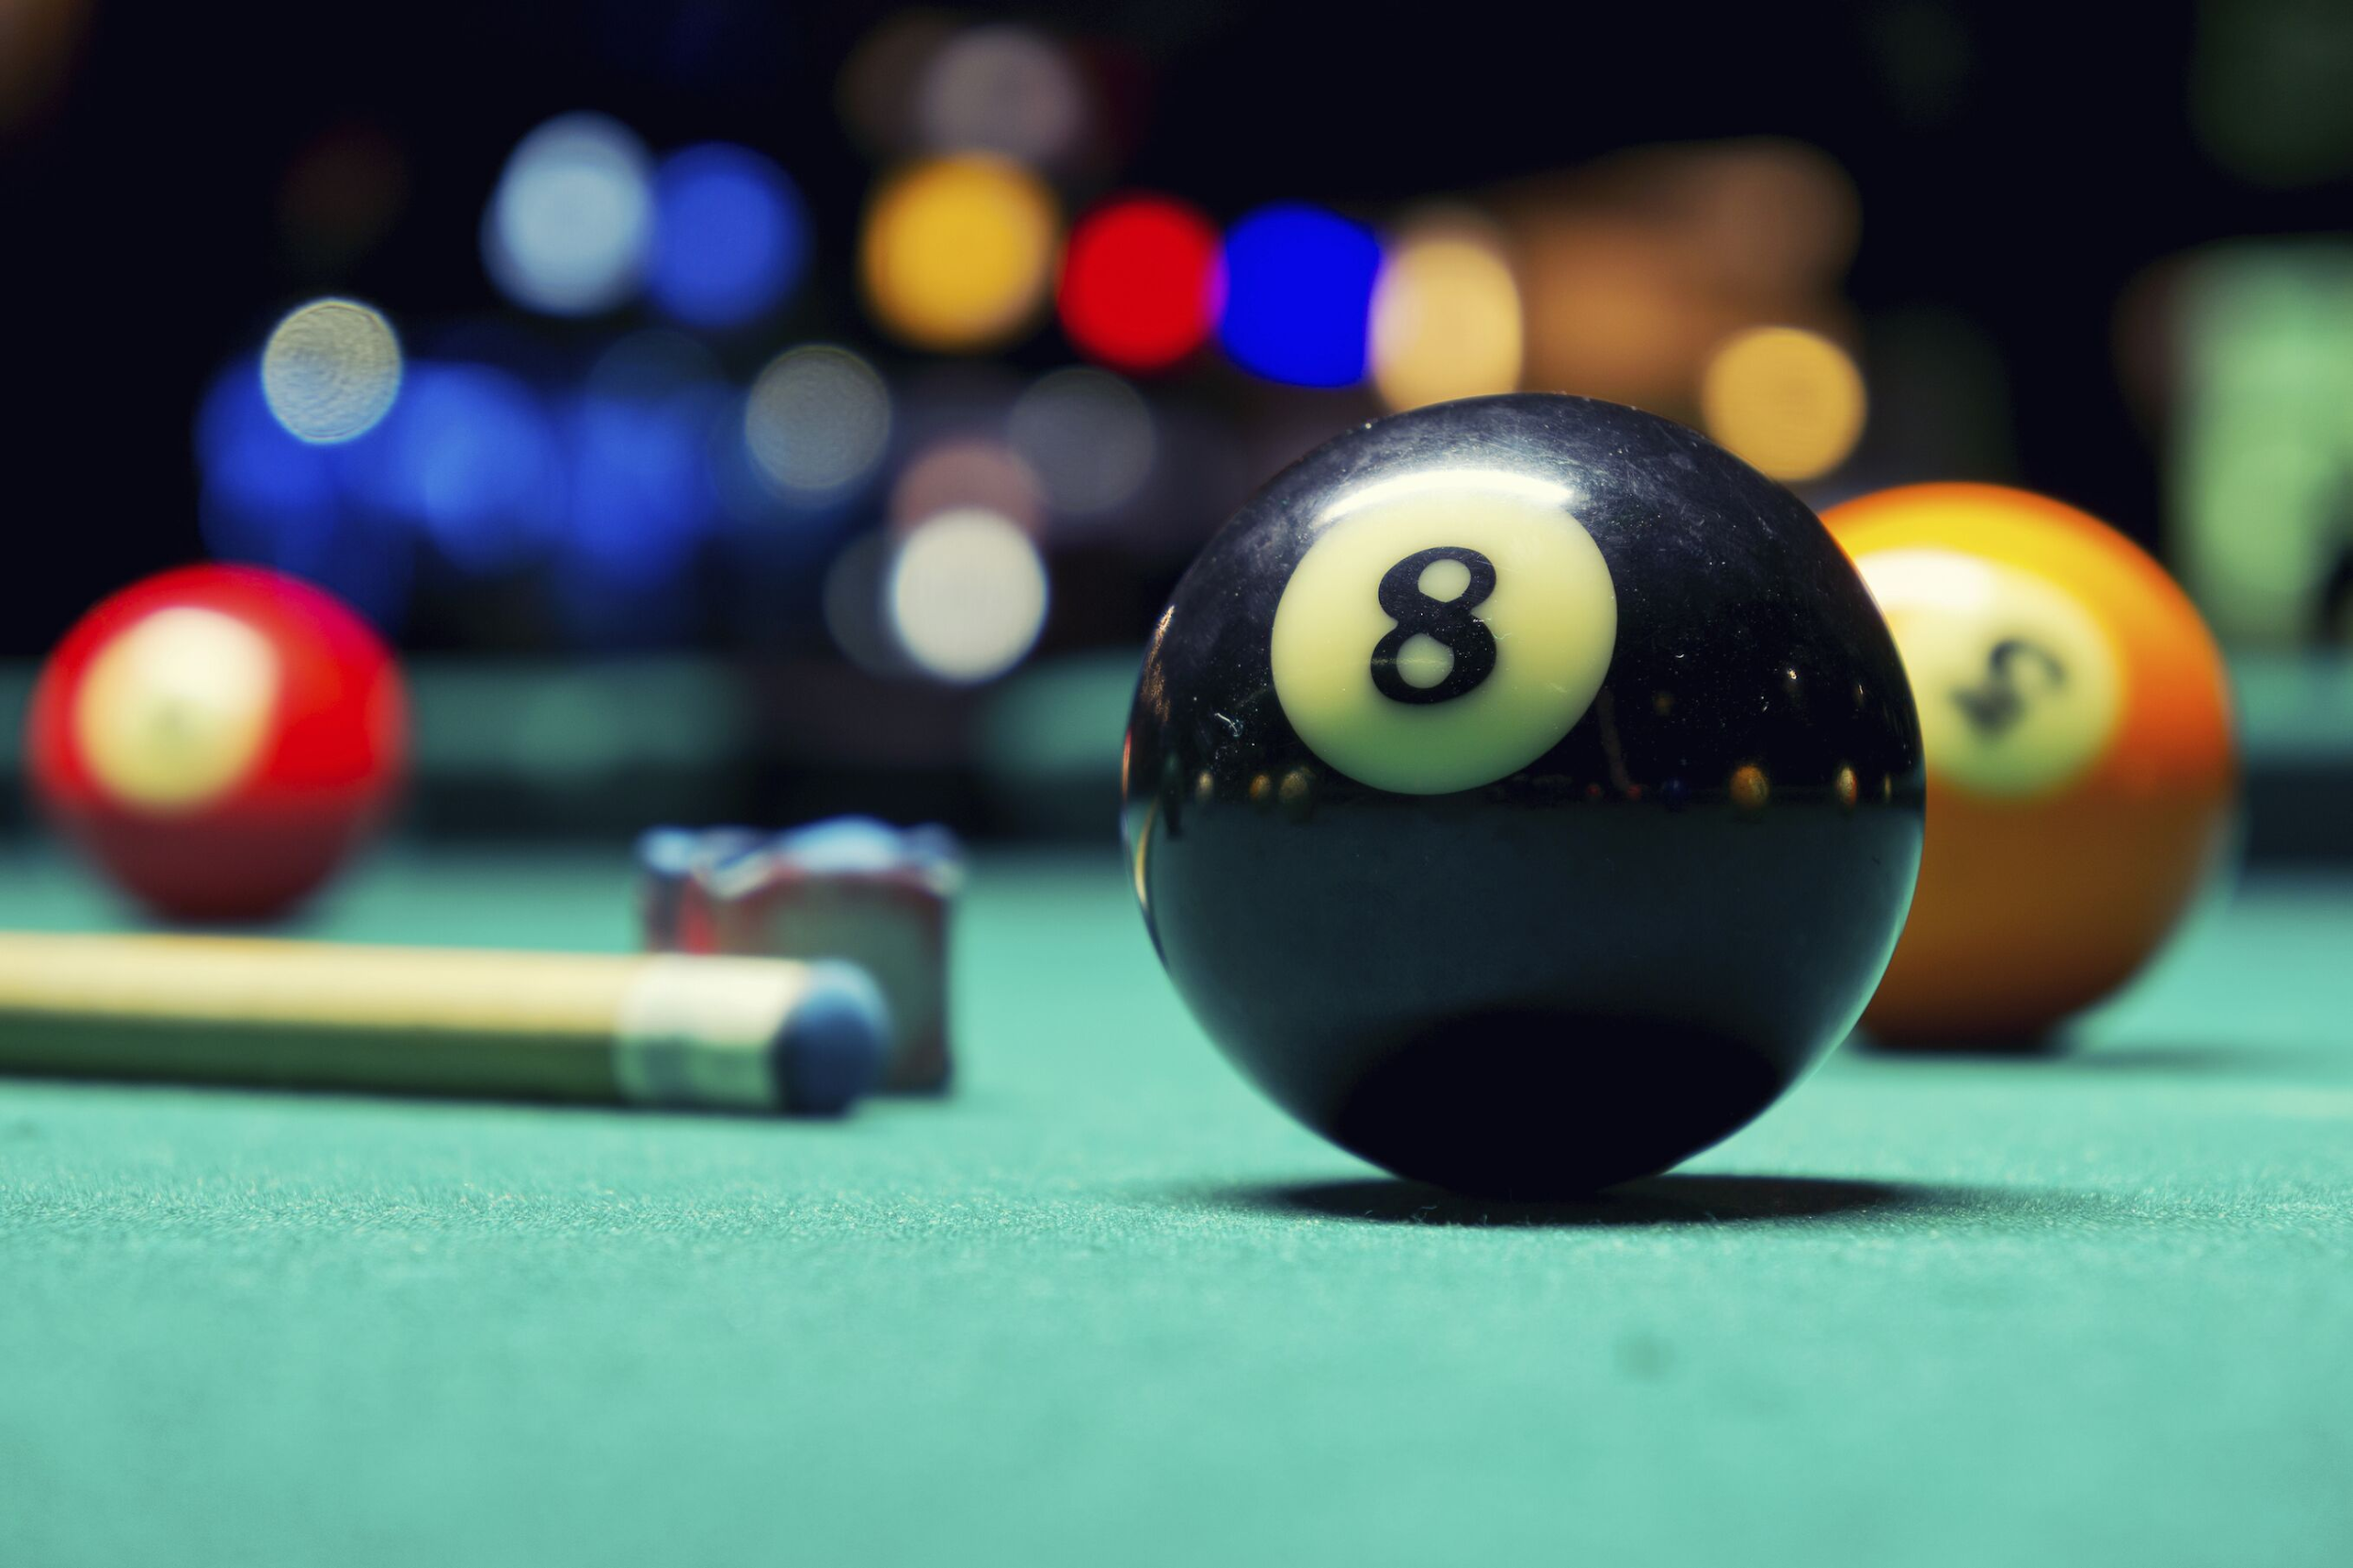 How Much Does a Pool Table Cost?